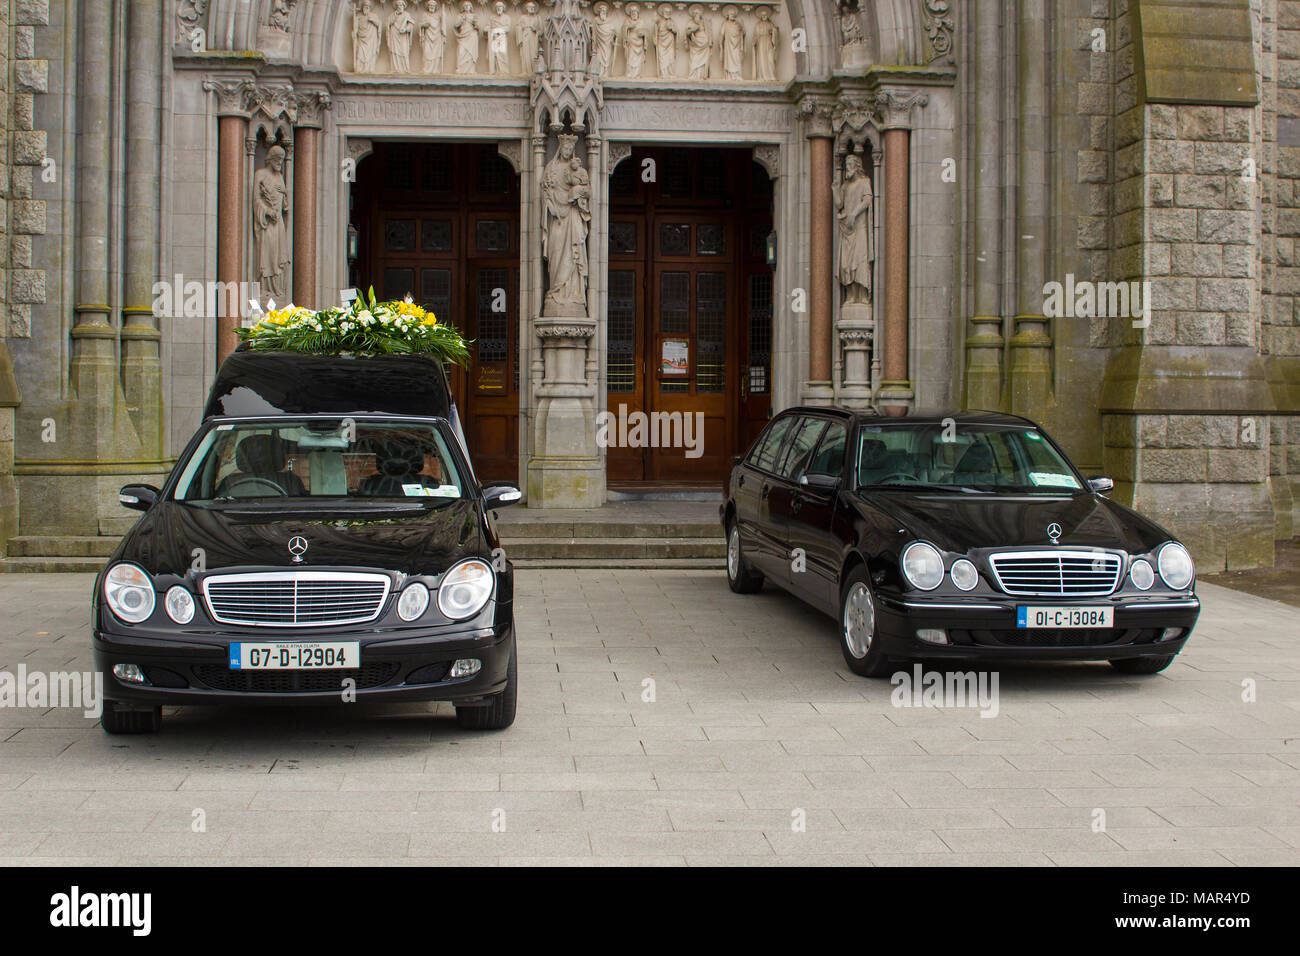 A hearse and a funeral car parked outside St Colman's Cathedral in Cobh Cork Ireland during a service for a local dignitary Stock Photo